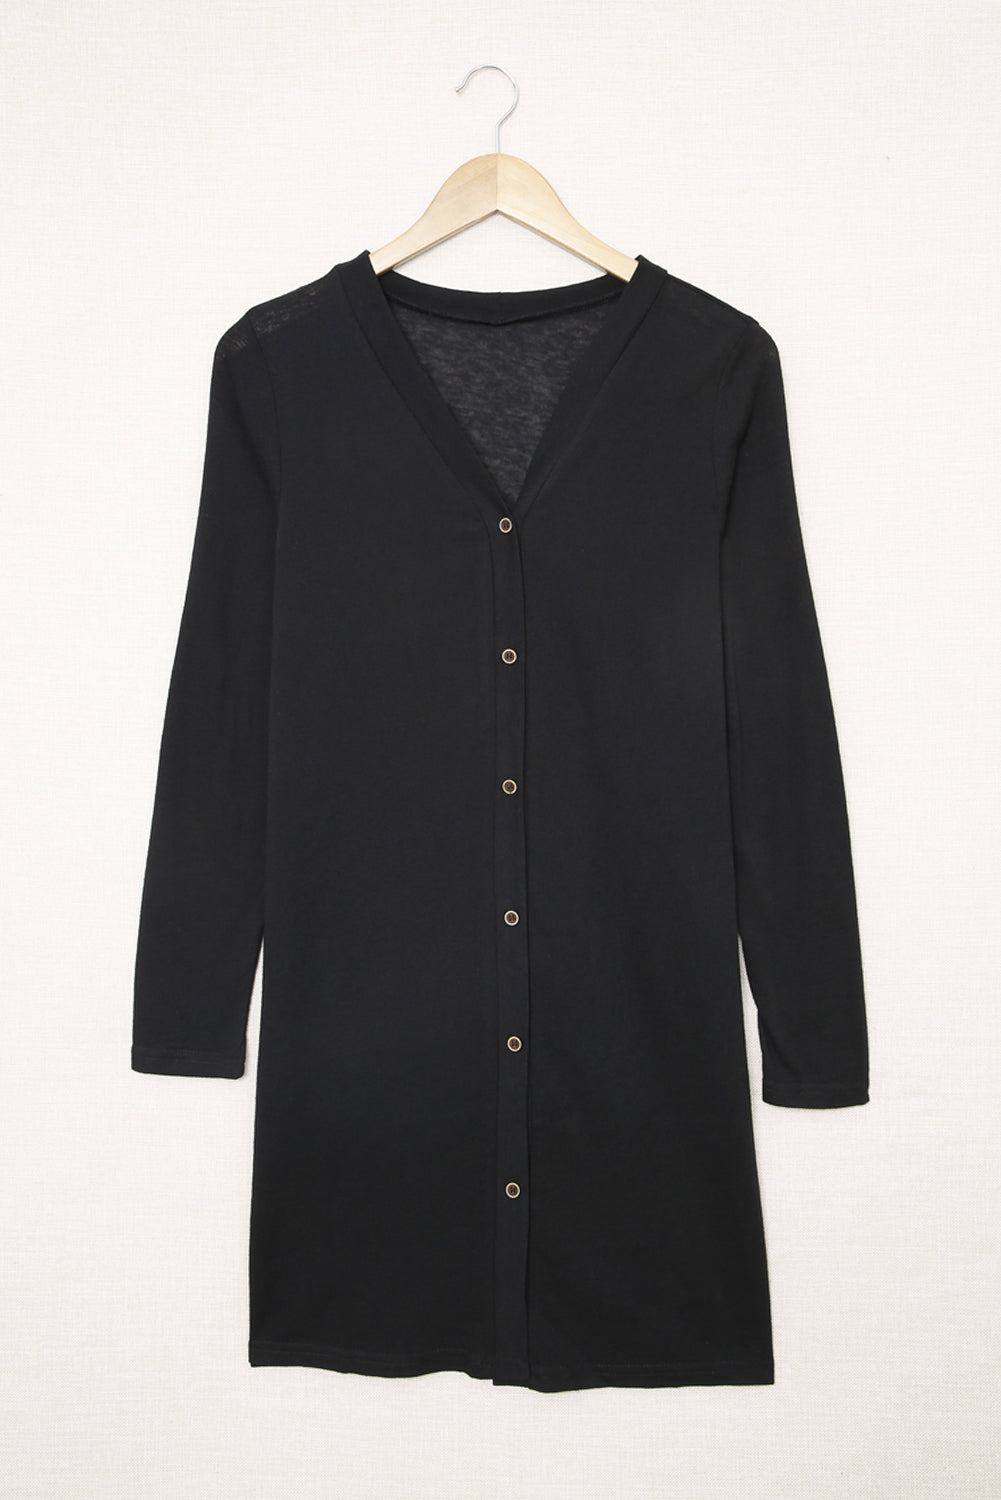 Black Casual Button Front Open Front Cover Up